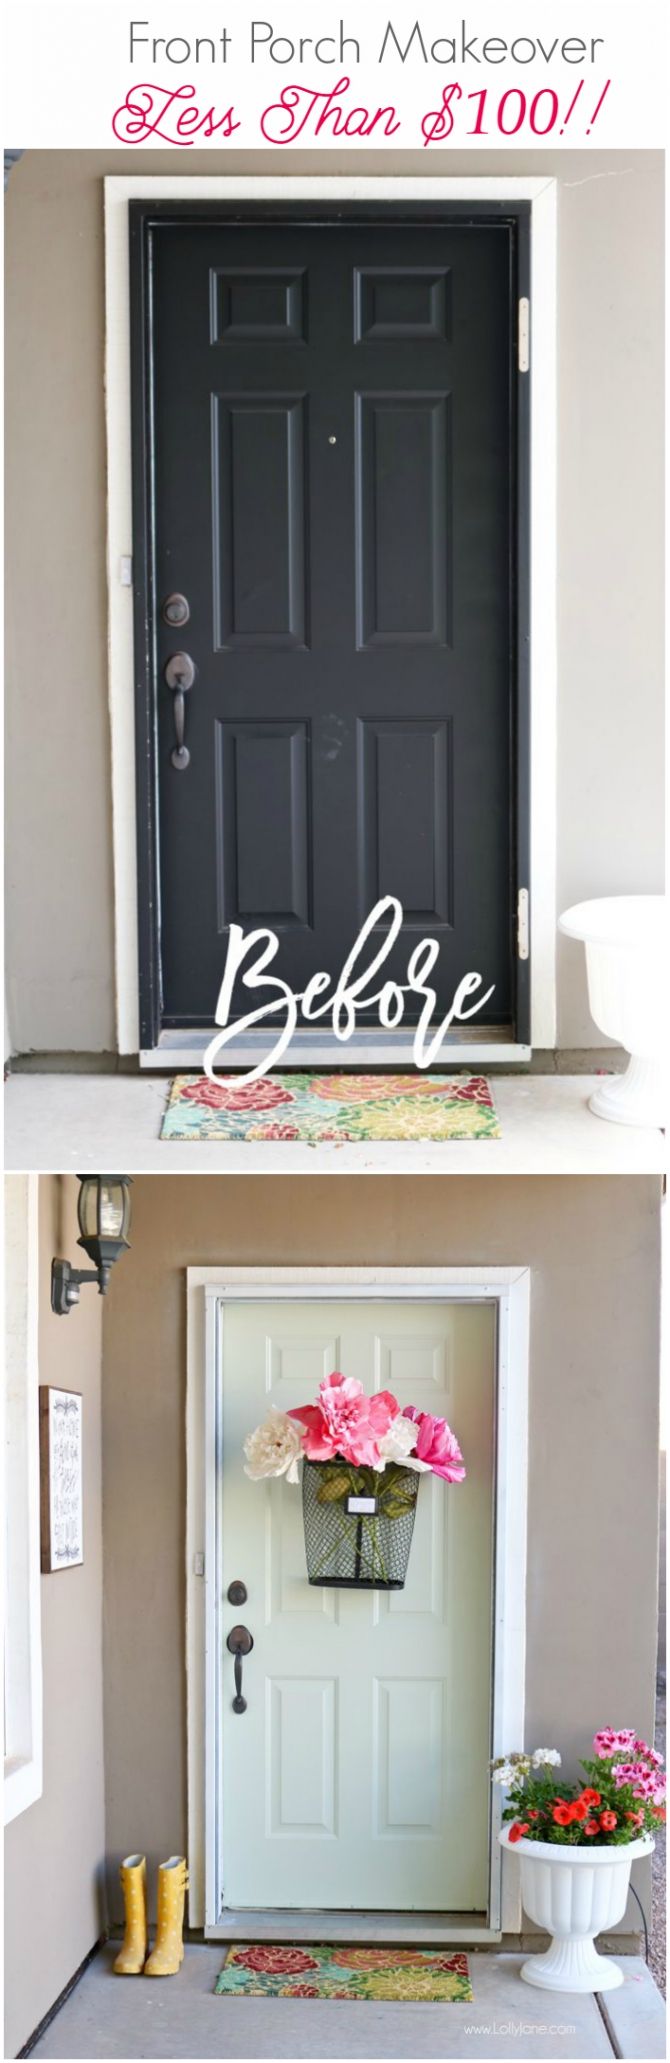 Easy Springy Porch Refresh... love this Door Makeover! Great front porch decor i...